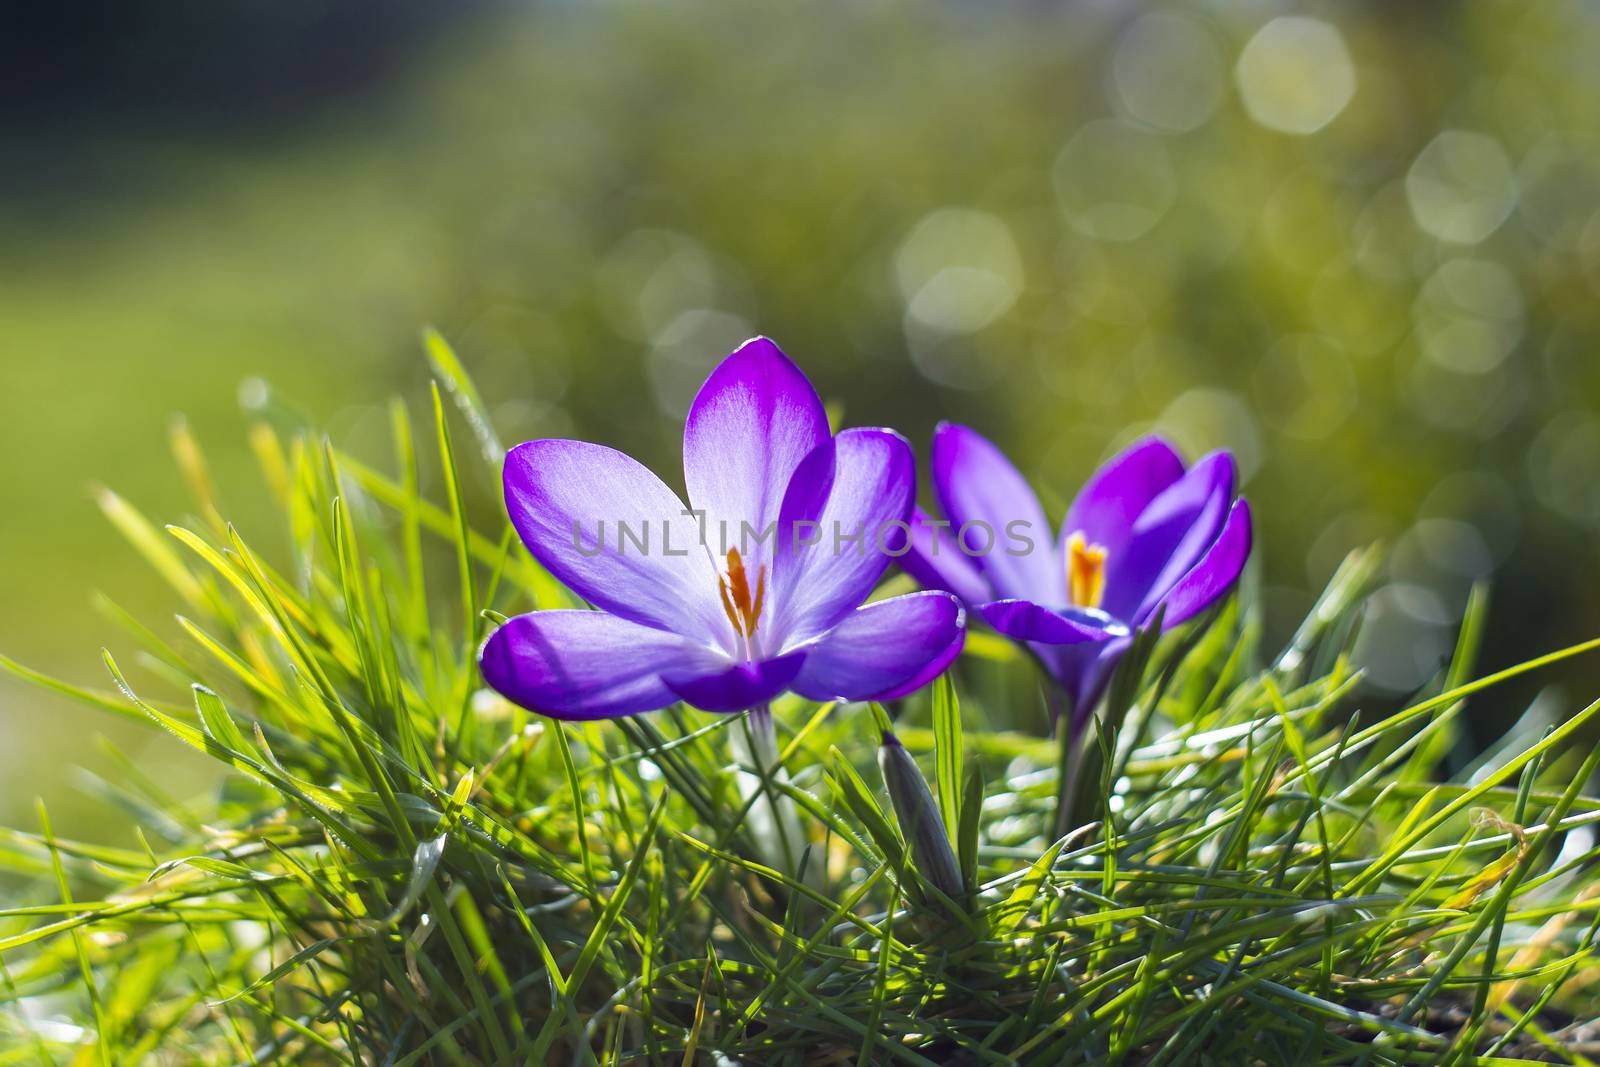 crocus - one of the first spring flowers by miradrozdowski